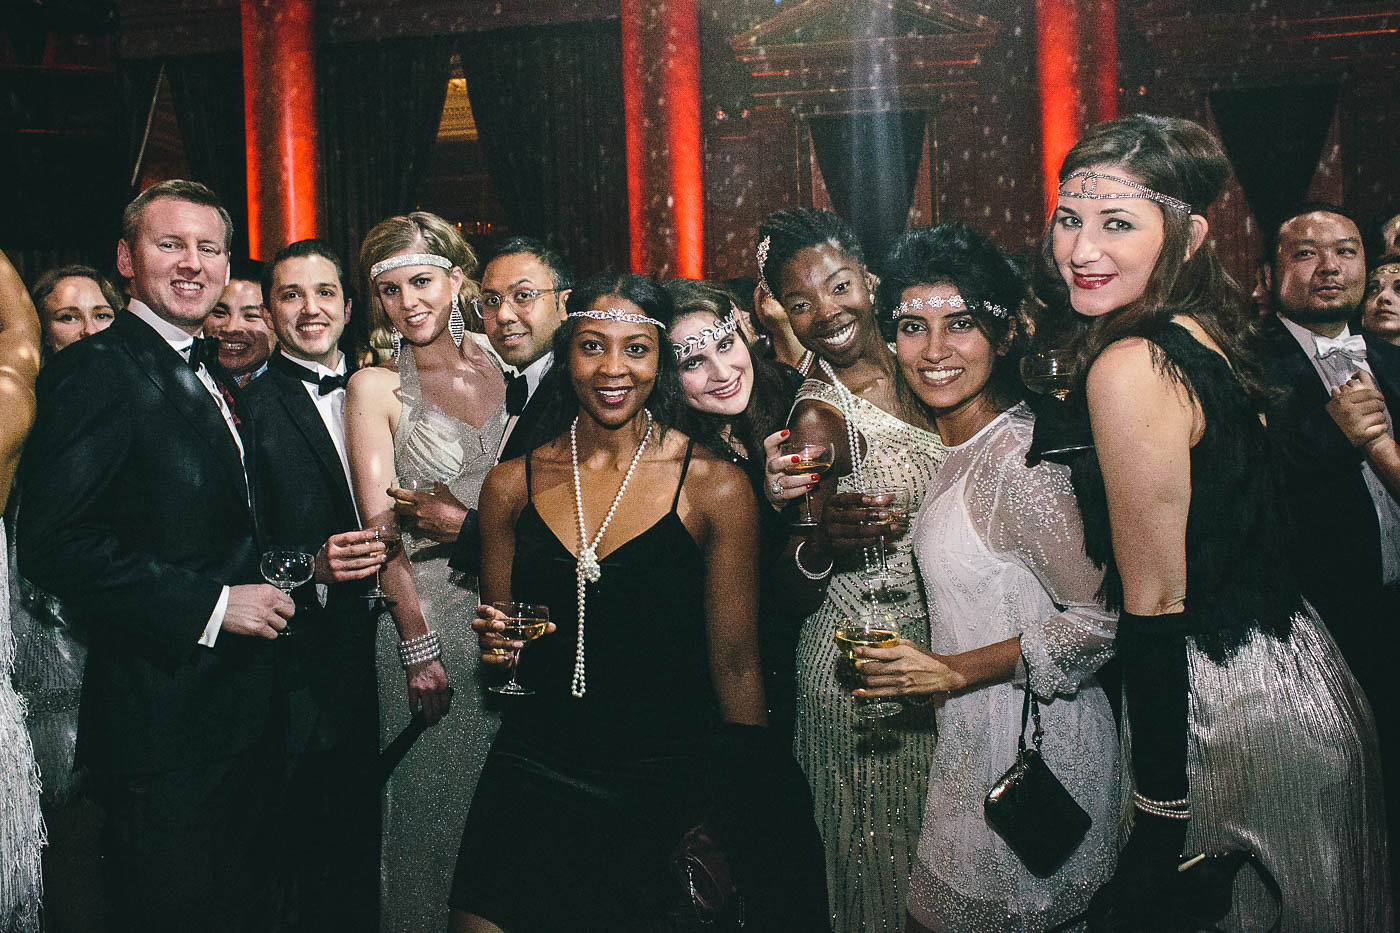 The Great Gatsby Party, 2015 - Credit: Lauren Spinelli Photography